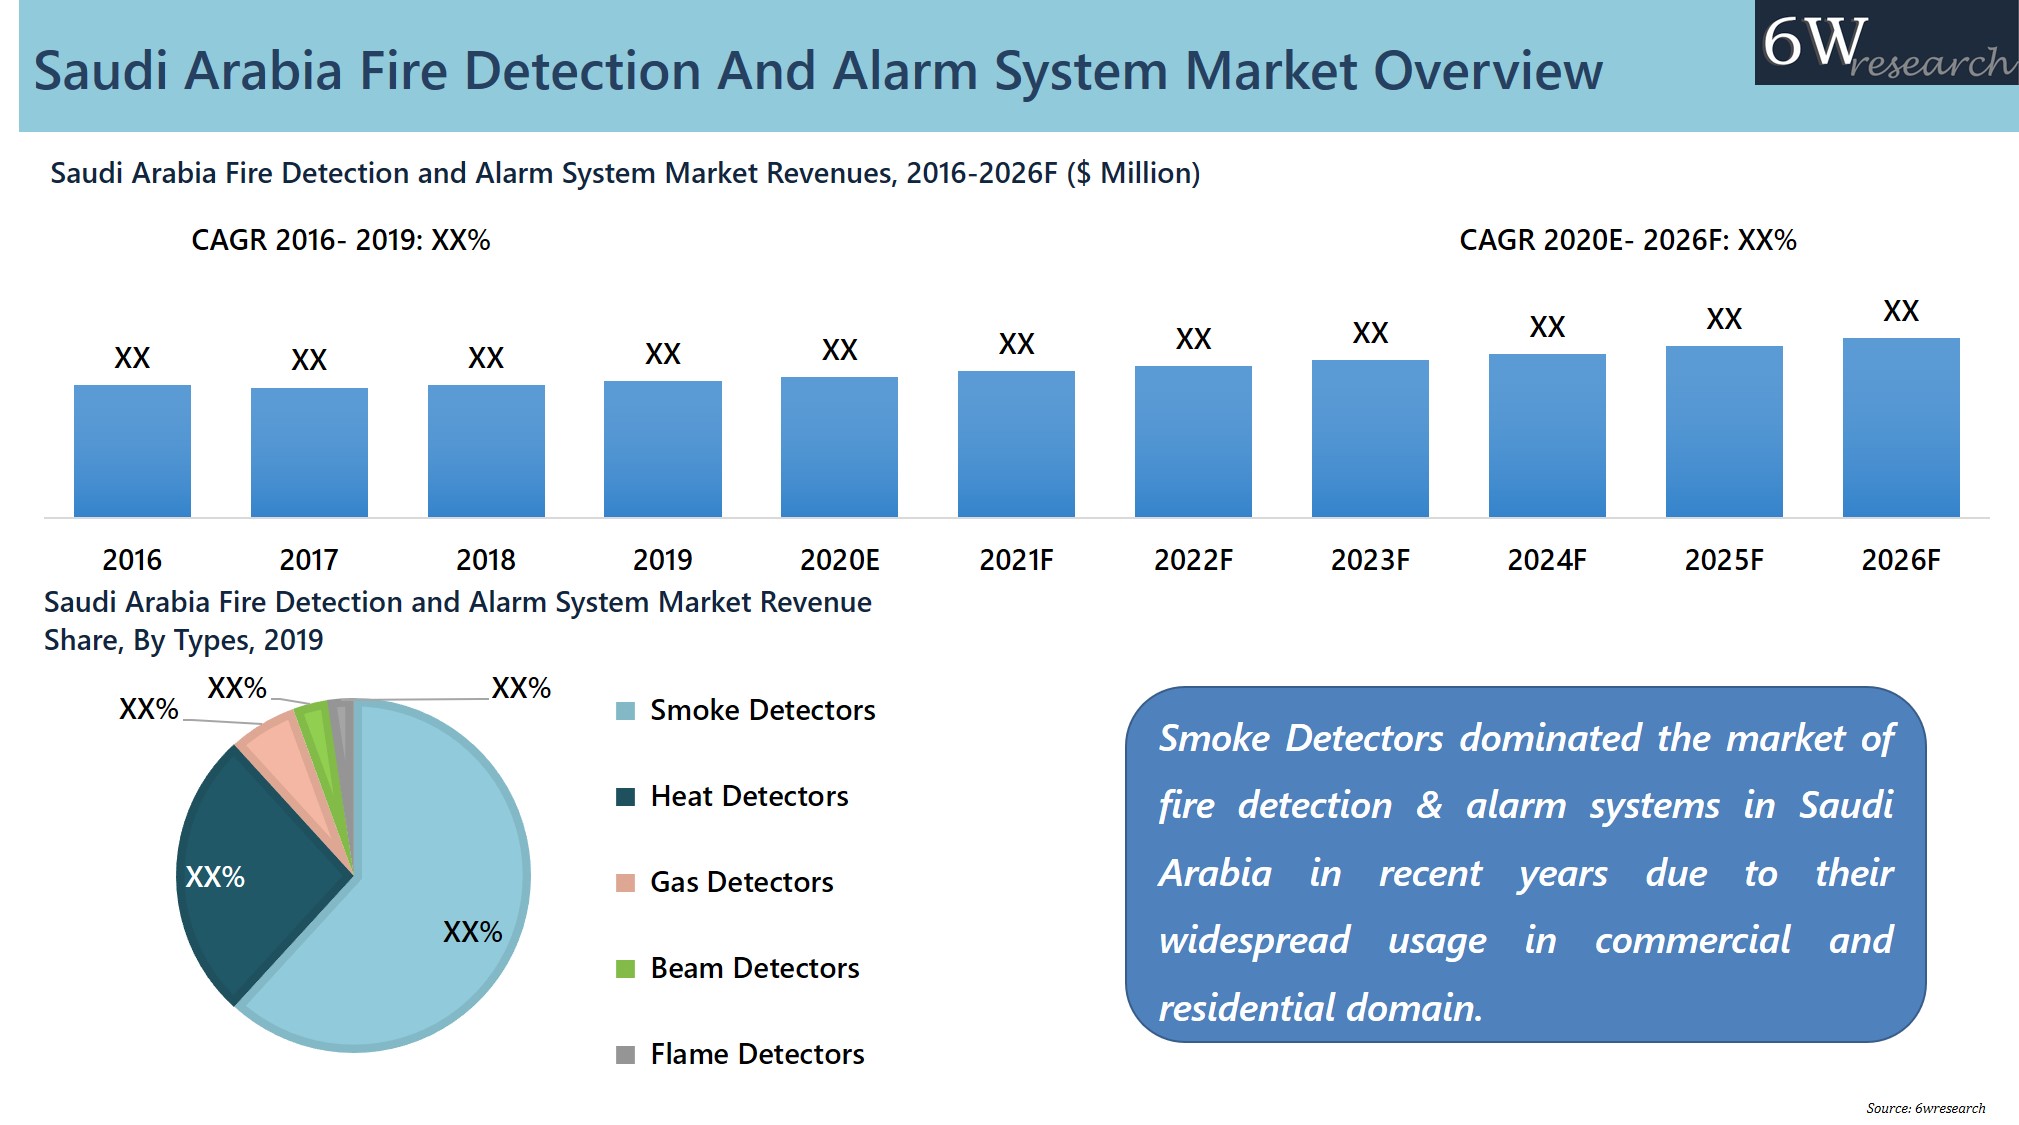 Saudi Arabia Fire Detection And Alarm System Market Overview